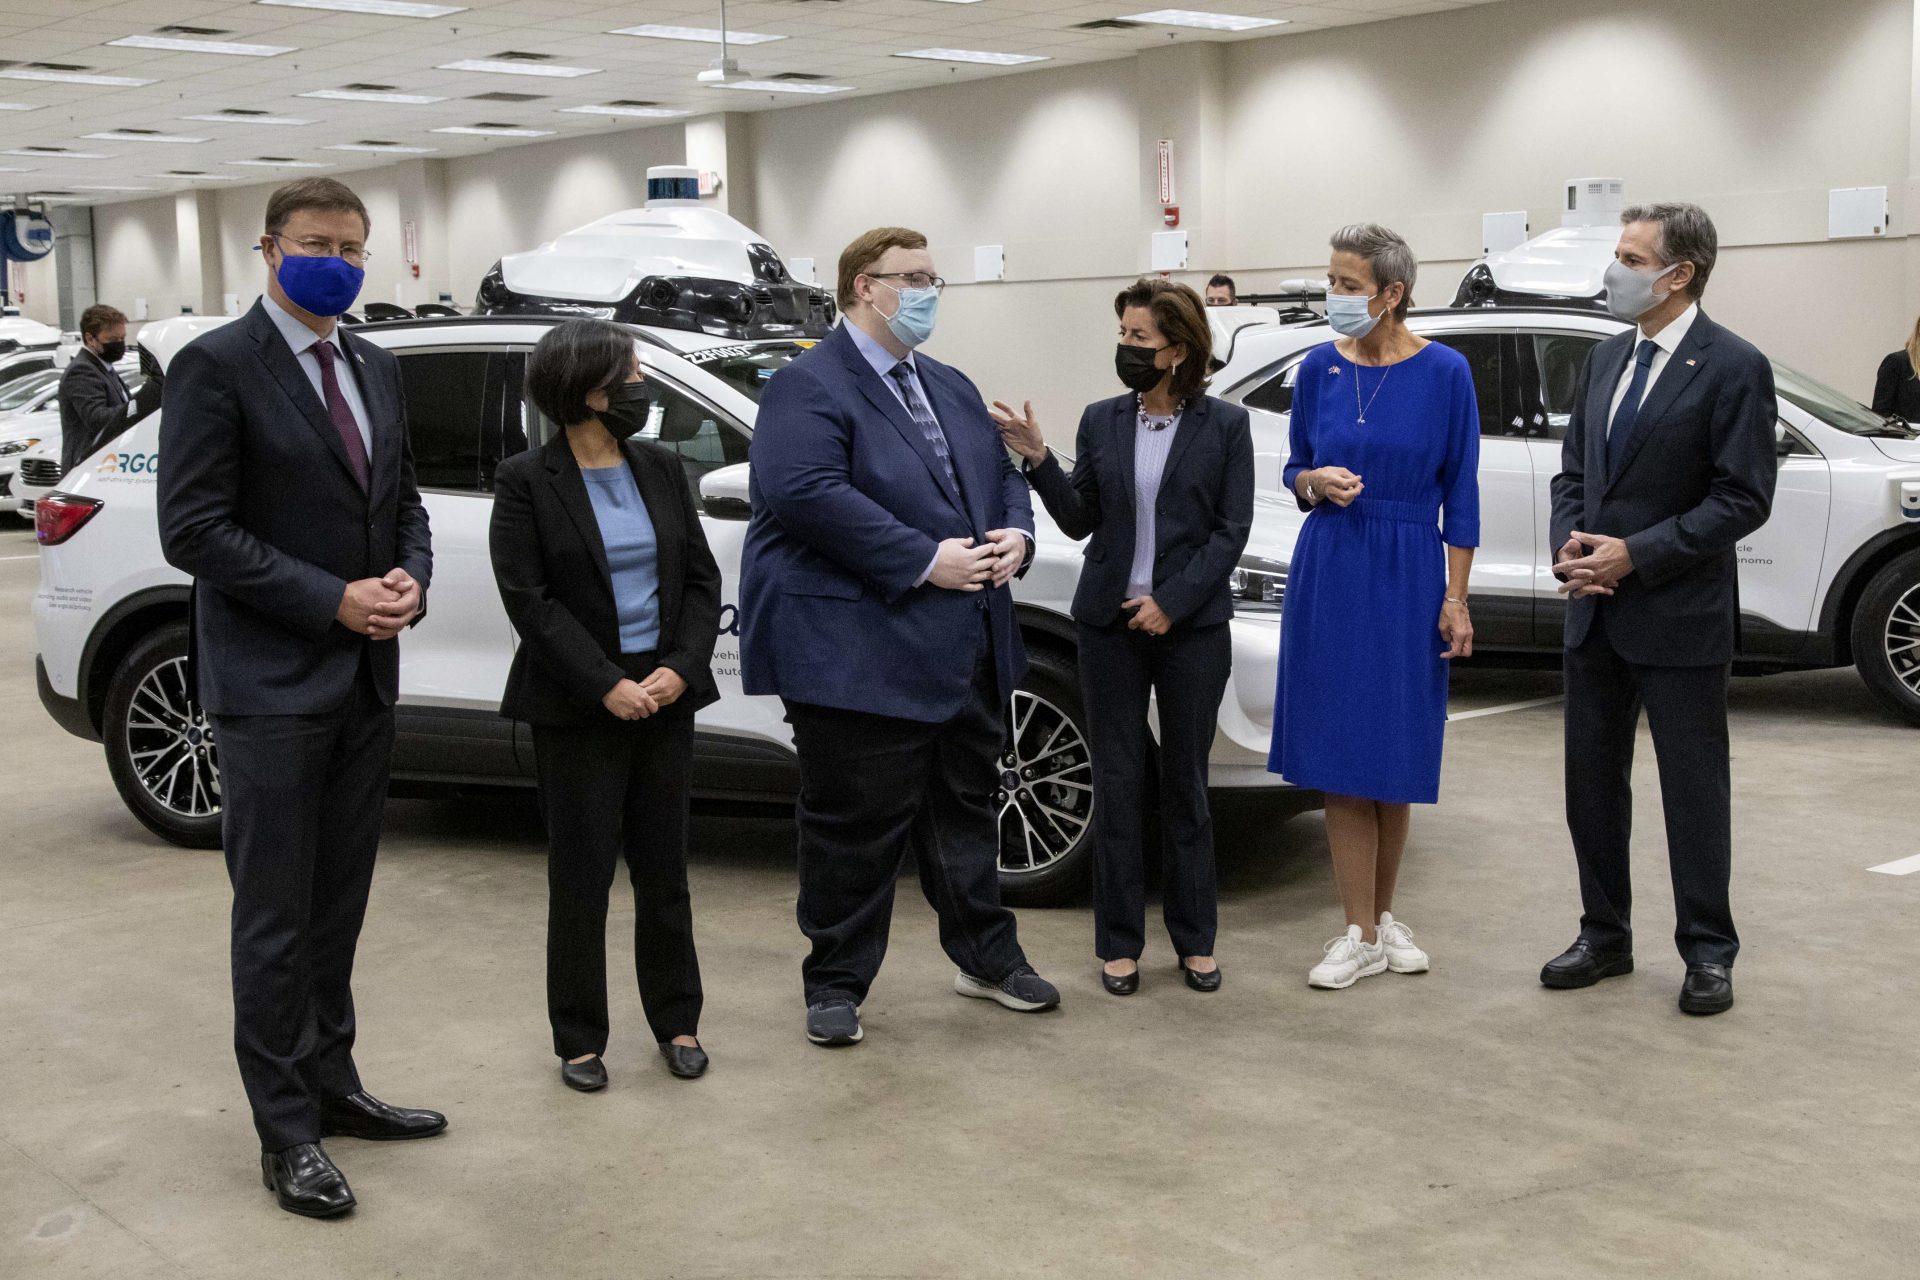 From left, European Commissioner Valdis Dombrovskis, U.S. Trade Representative Katherine Tai, ARGO CEO Bryan Salesky, Commerce Secretary Gina Raimondo, European Commissioner Margrethe Vestager and Secretary of State Antony Blinken, talk as they pose for photos on a tour of the ARGO facility during a meeting of the United States-European Union Trade and Technology Council (TTC), Thursday, Sept. 30, 2021, in Pittsburgh.